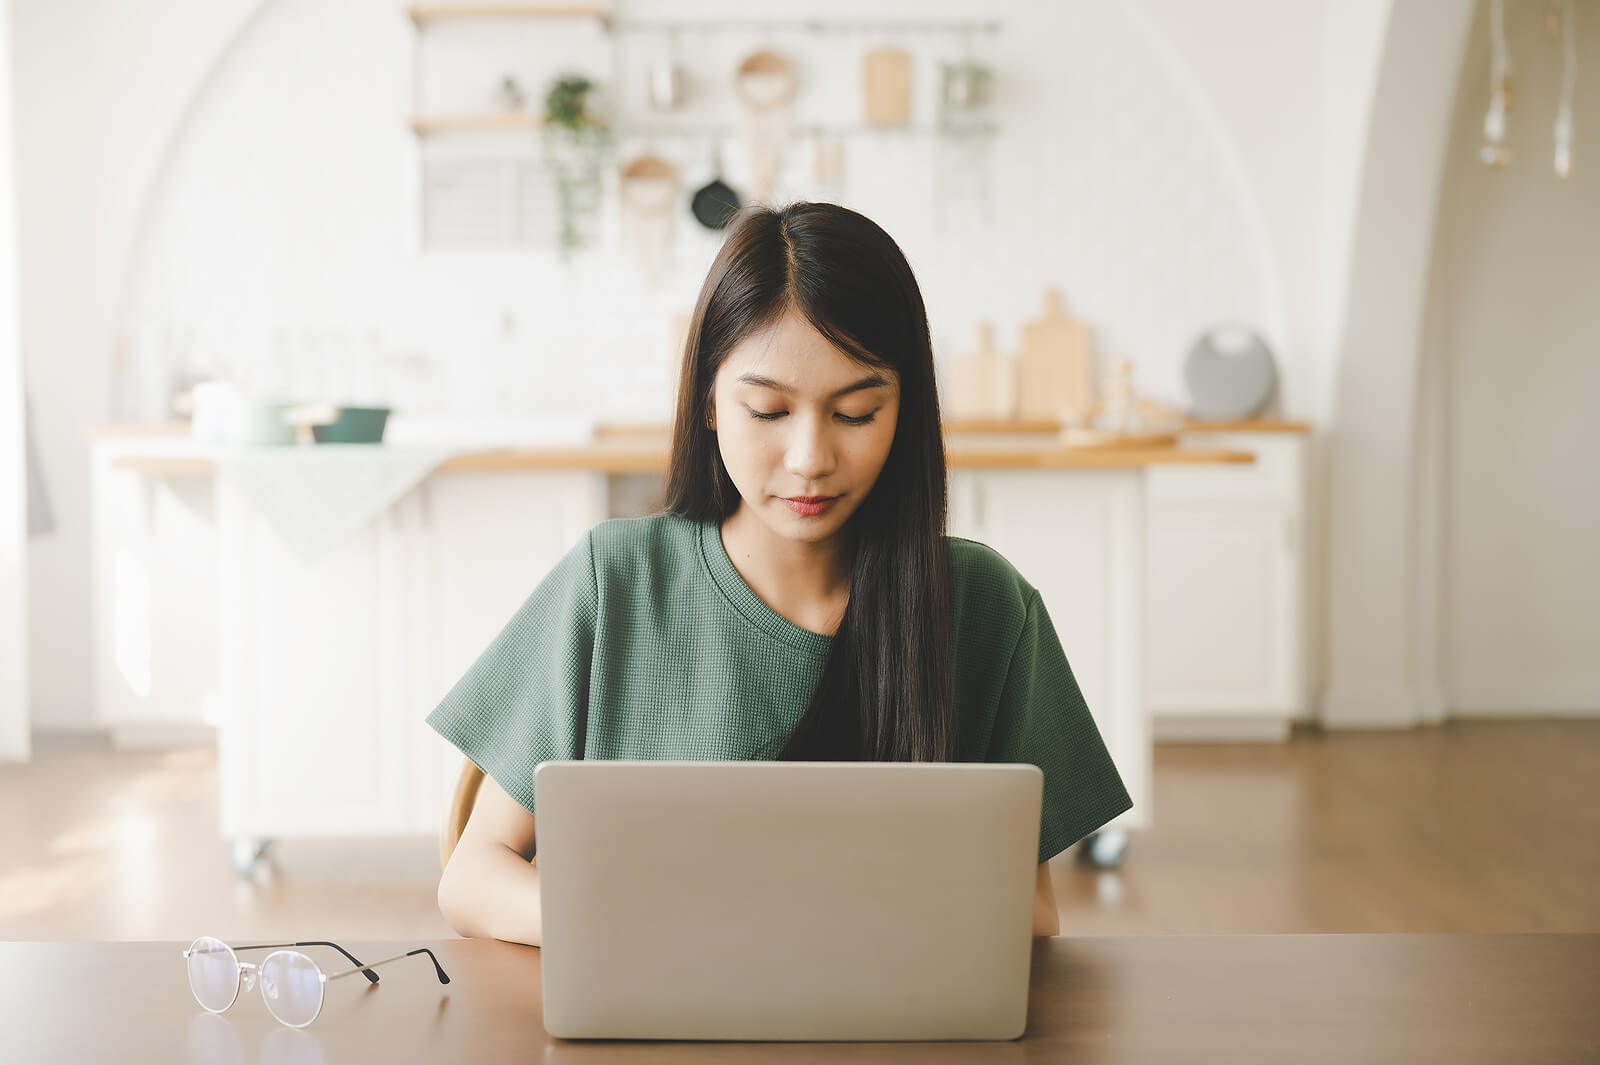 Woman on laptop. If you’re looking for online clinical supervision in Florida, we can help. We offer social work supervision and counseling supervision for those in need. Call now and let us support your growth.